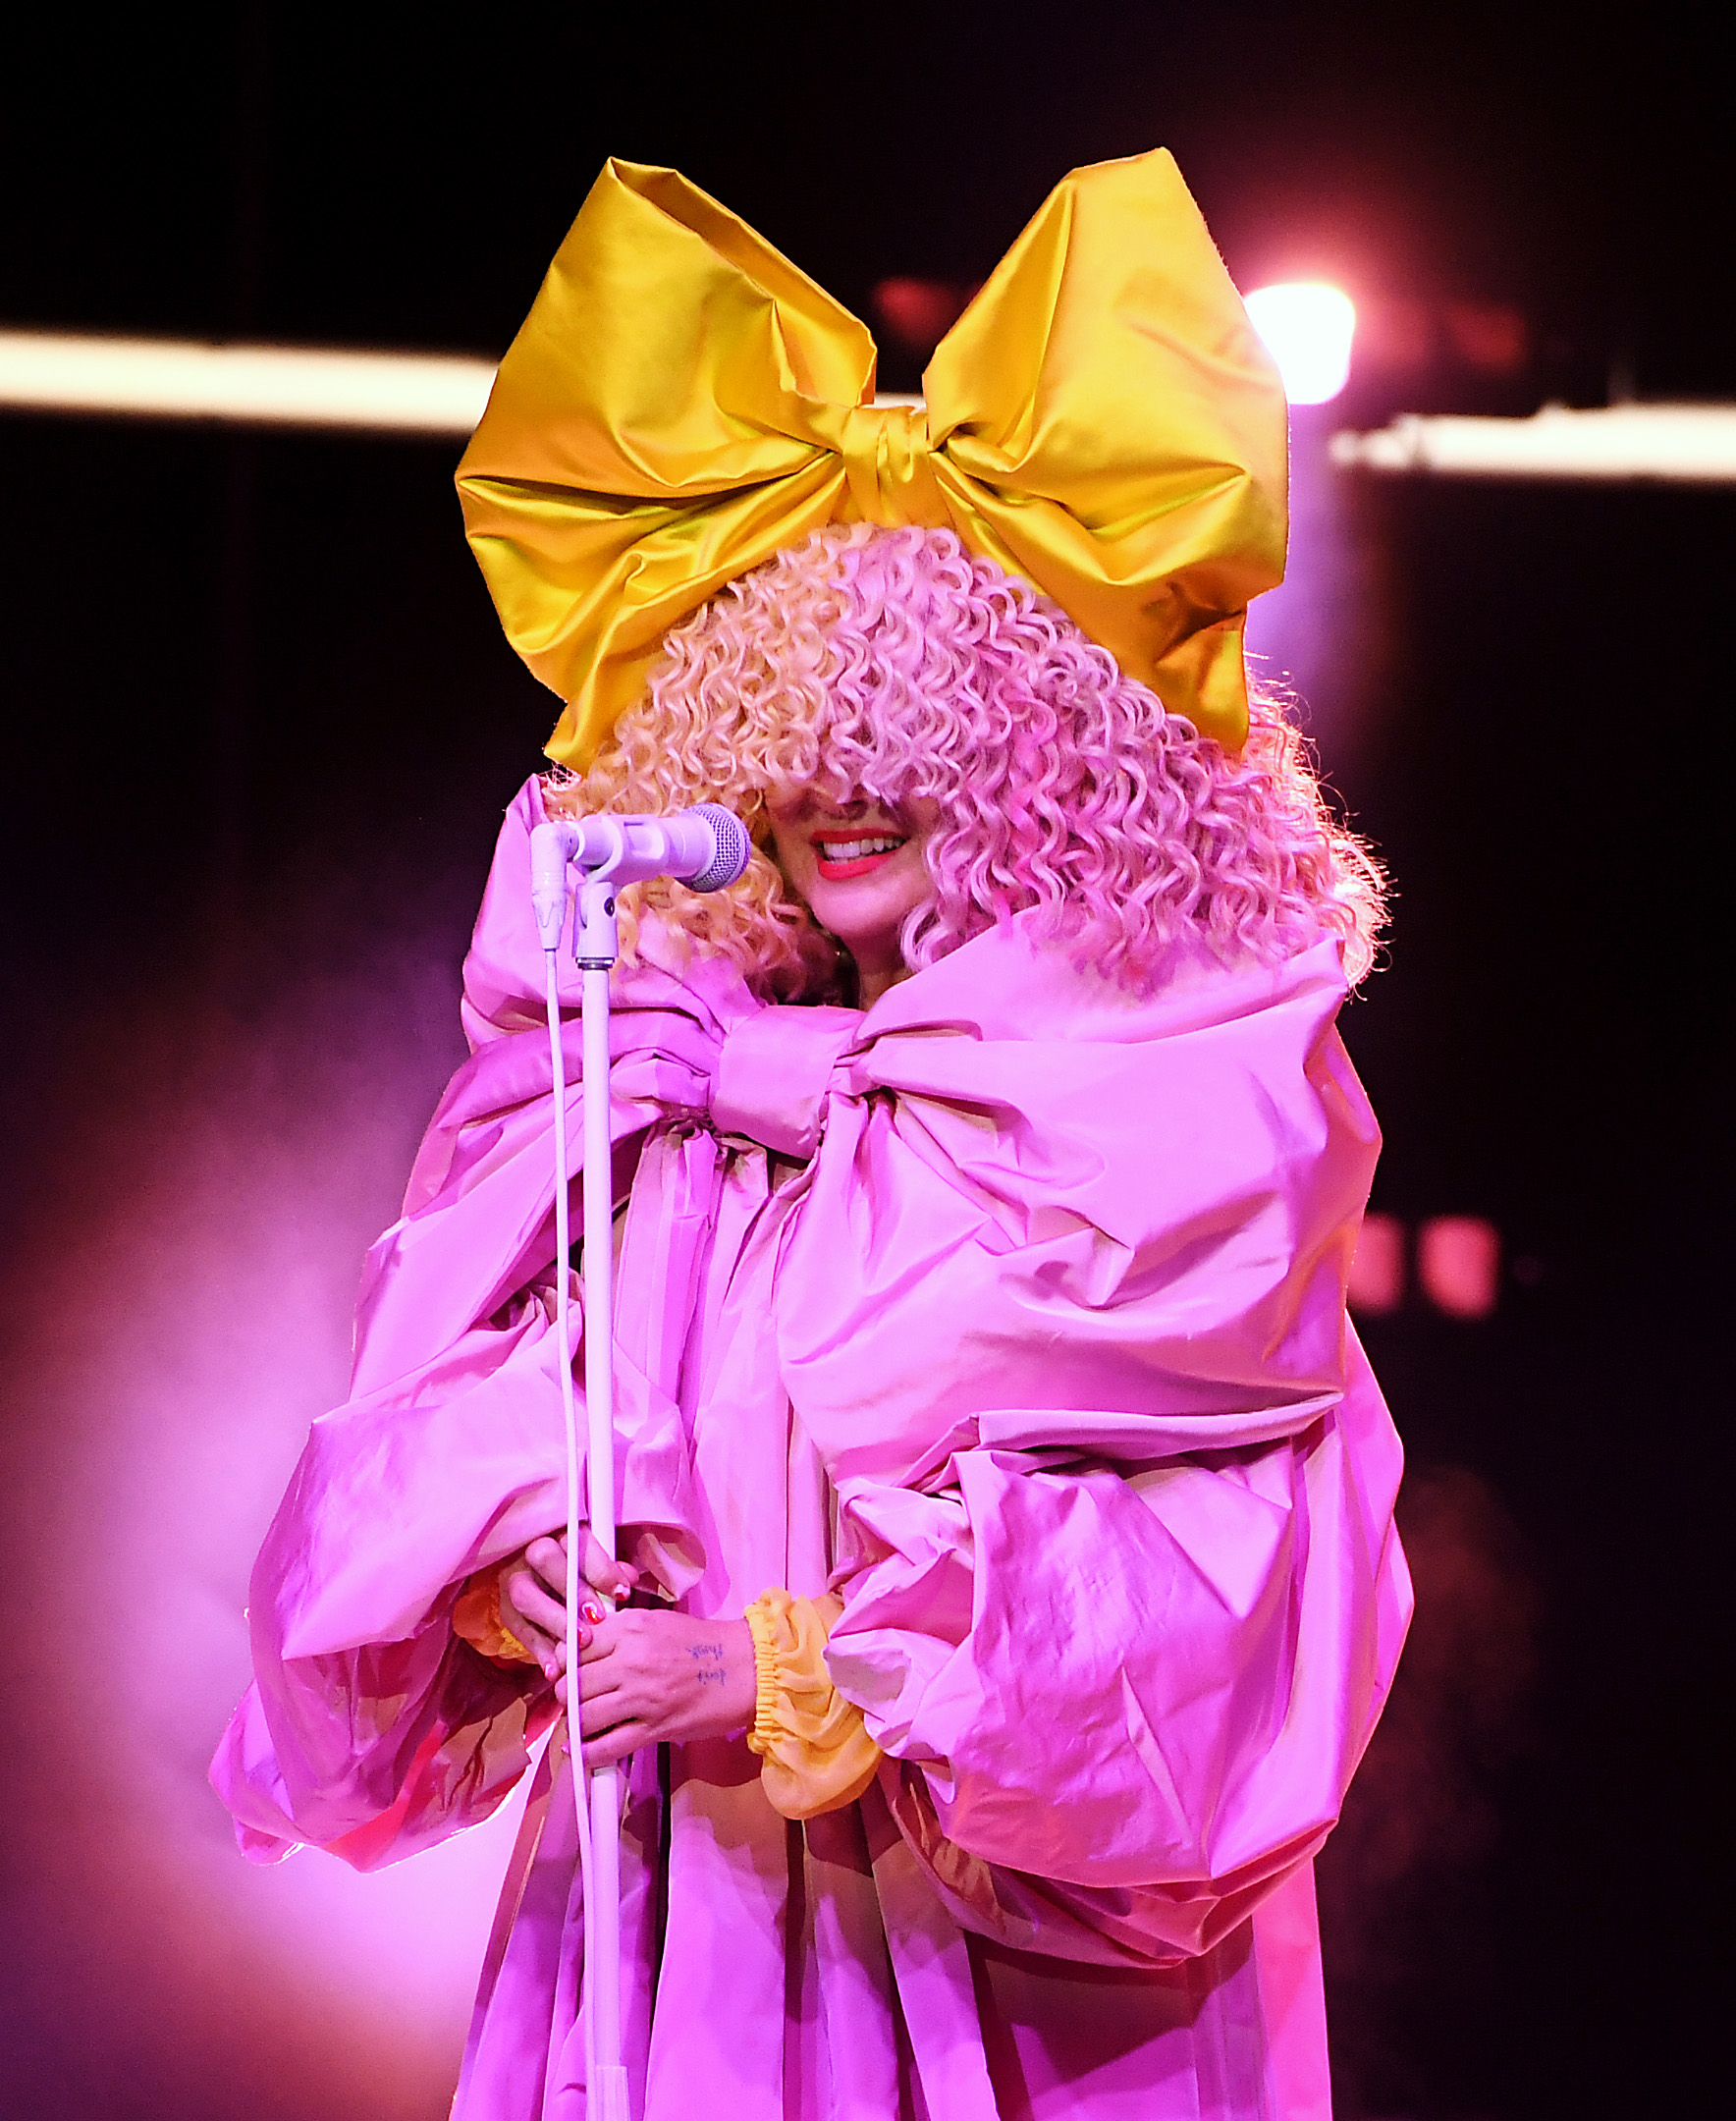 sia performing on stage in an oversized dress and large wig covering half her face